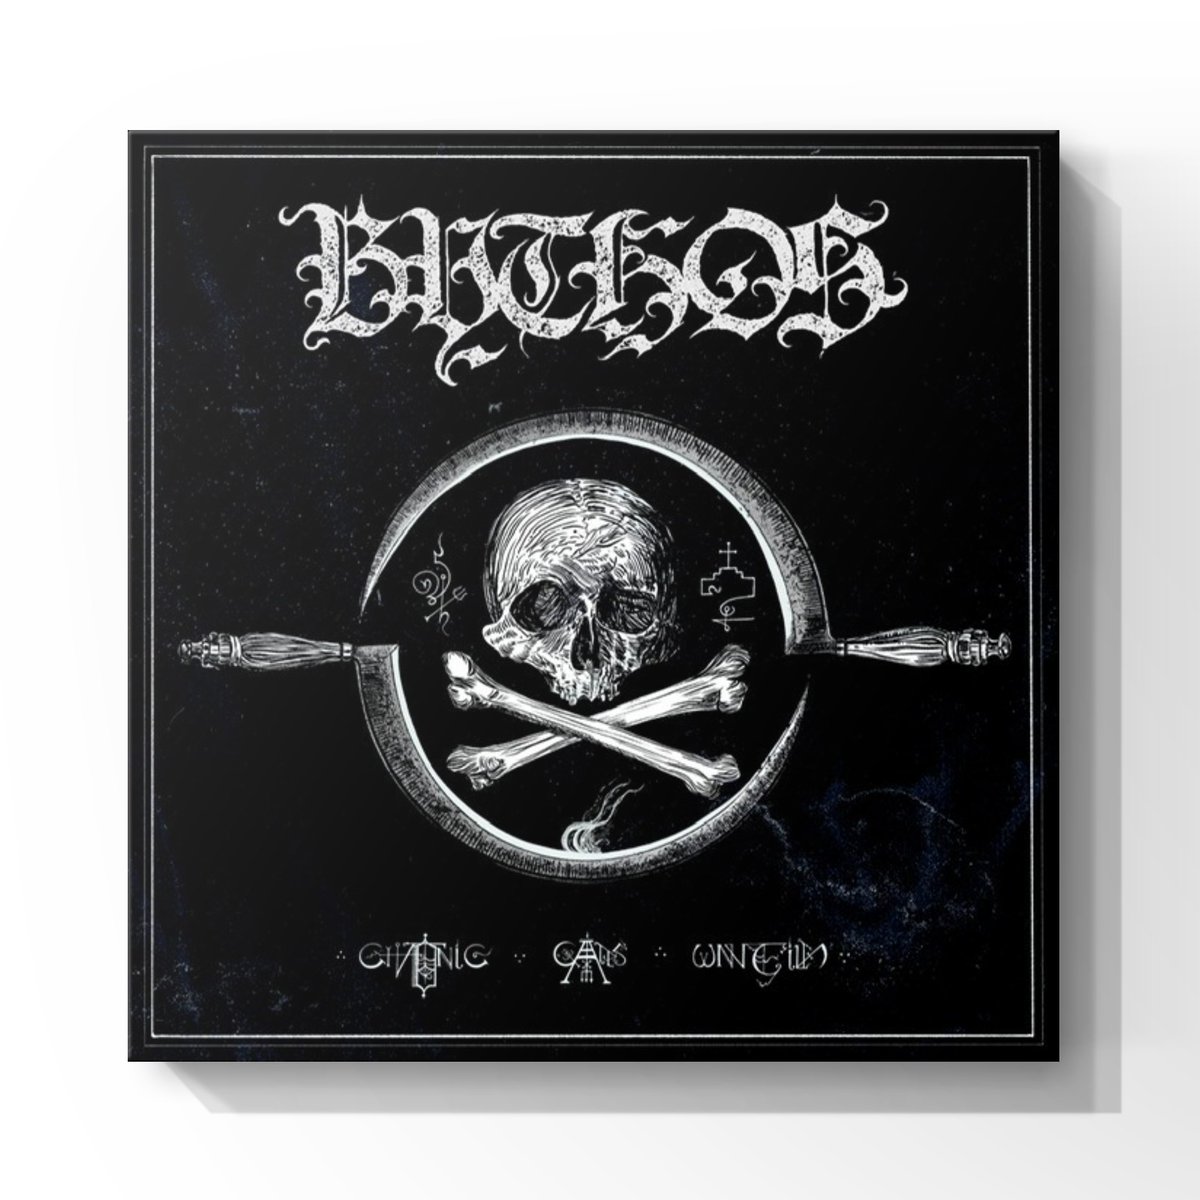 Terratur Possessions has done again. They always deliver! This is some excellent, mid paced melodic black metal. High recommendation!

Bythos - Chthonic Gates Unveiled 🇫🇮

#FFFApr19